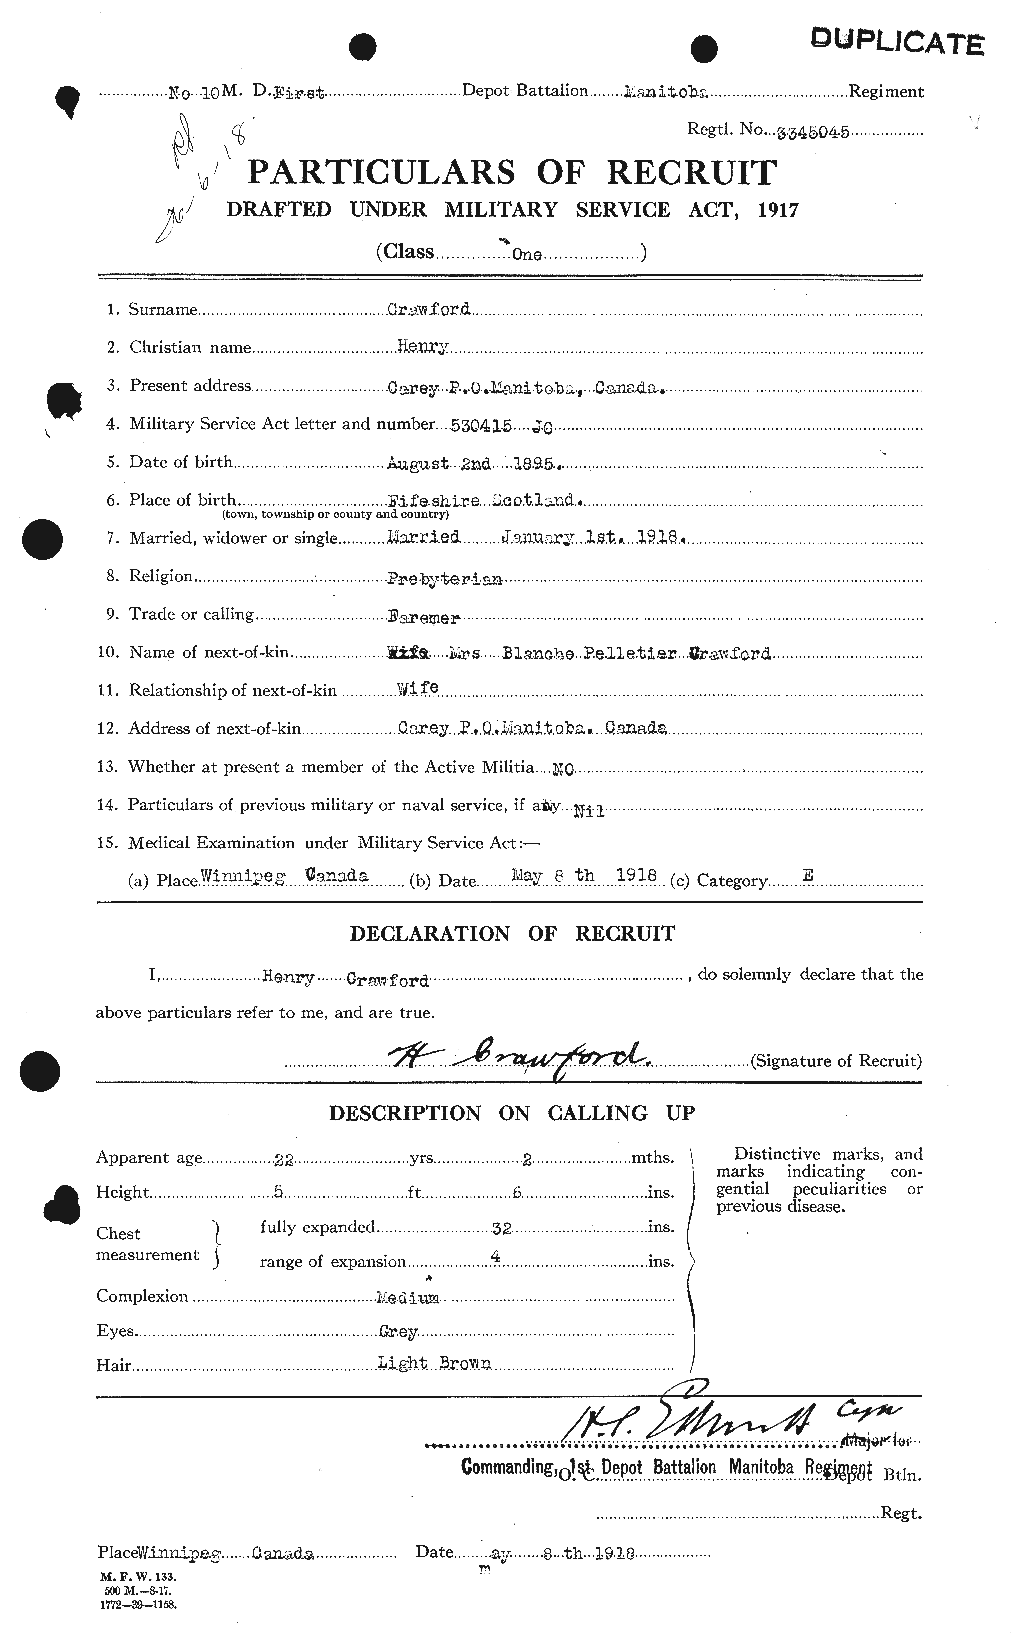 Personnel Records of the First World War - CEF 060574a